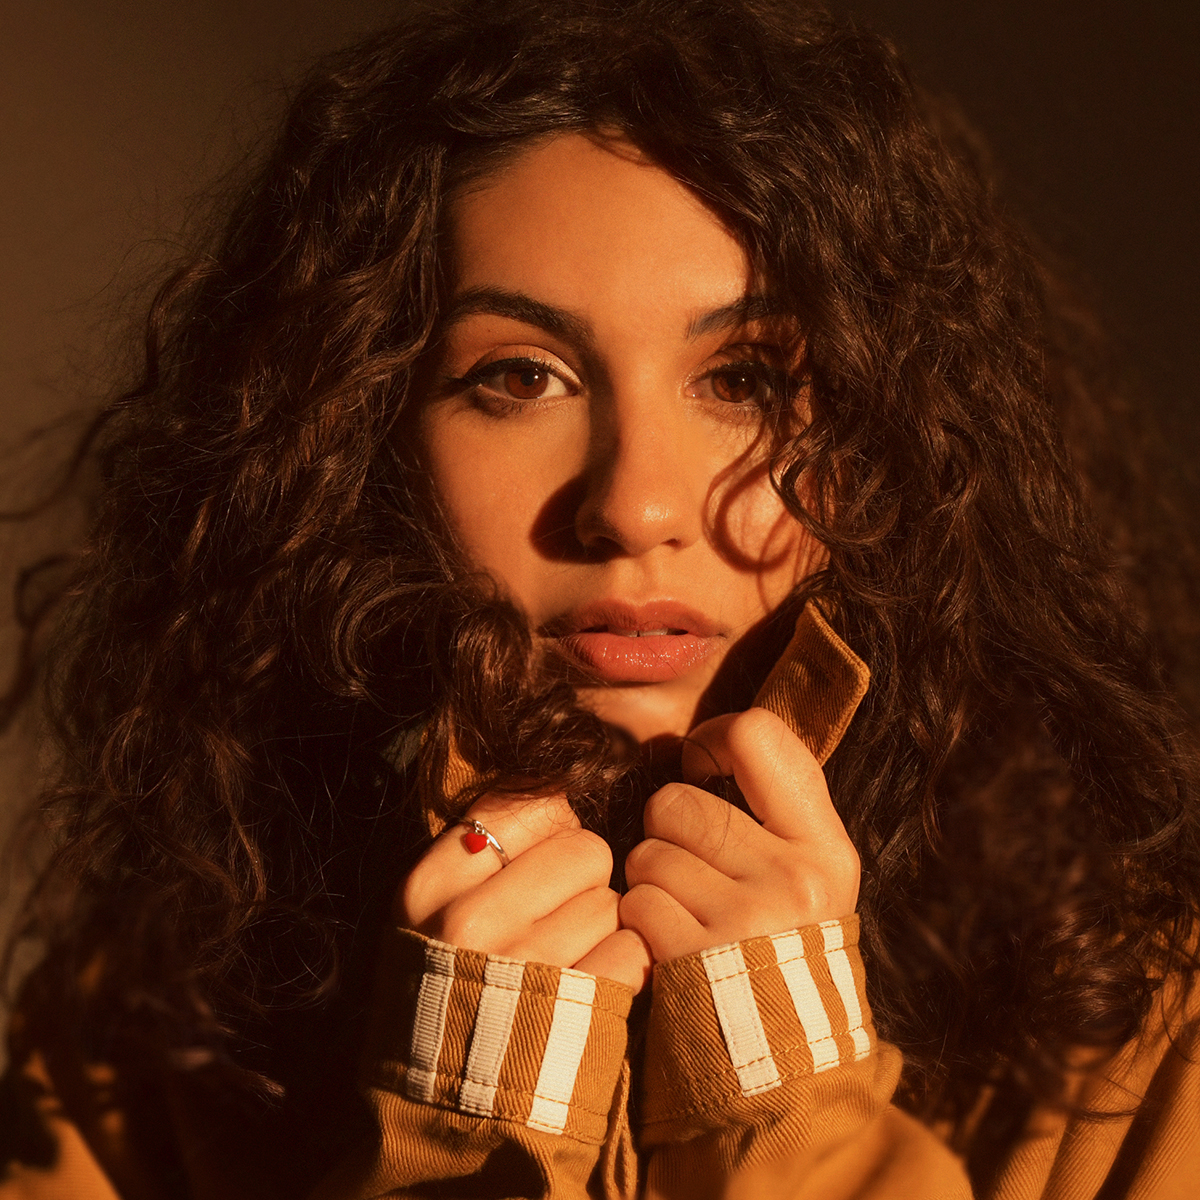 Alessia Cara Drops Two New Singles “Sweet Dream” and “Shapeshifter” – Ahead Of Upcoming Third Album.